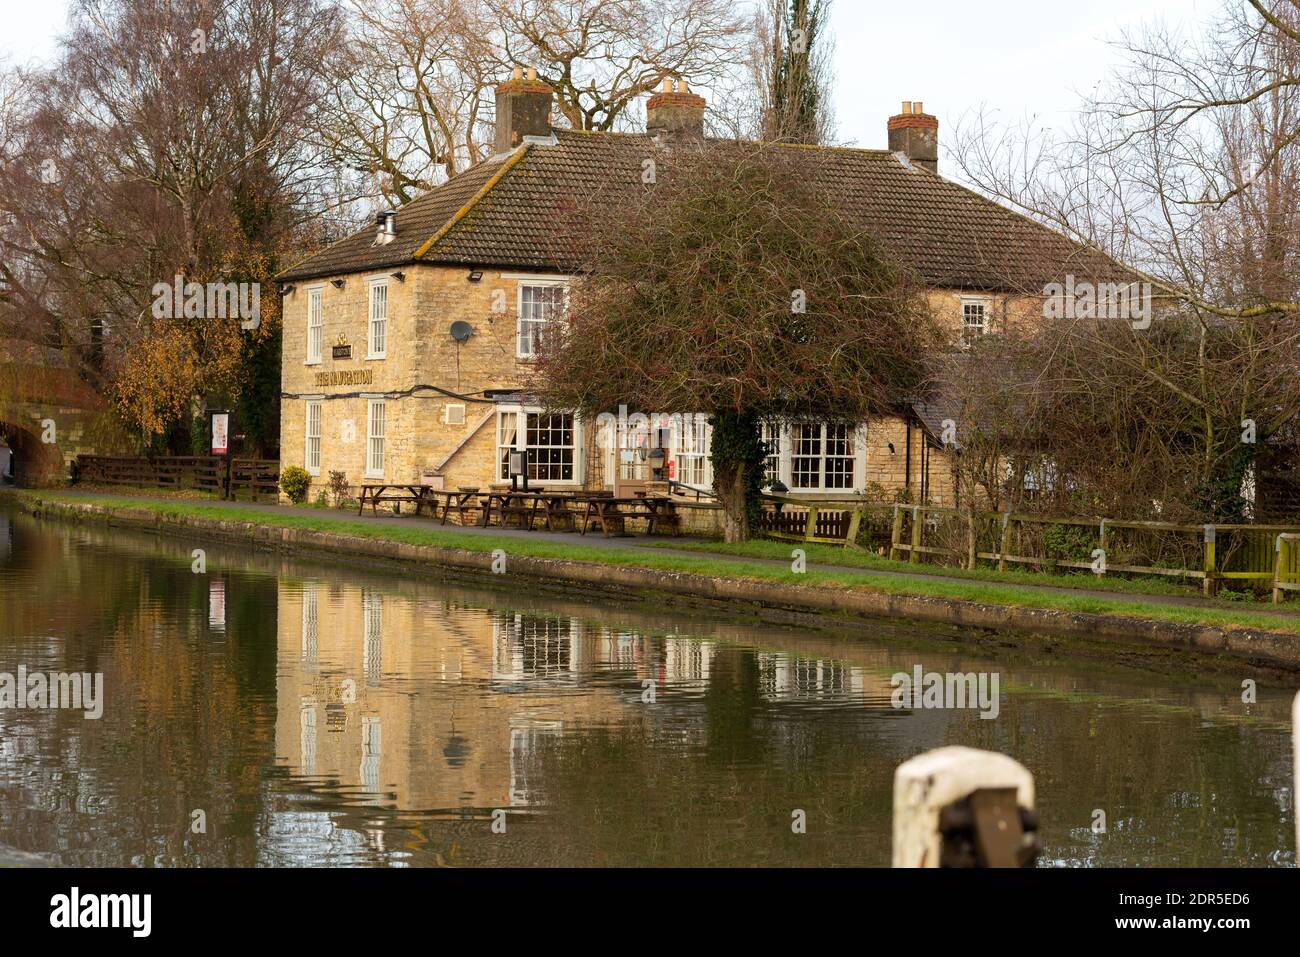 pub in uk Northampton along canal with reflection in water Stock Photo